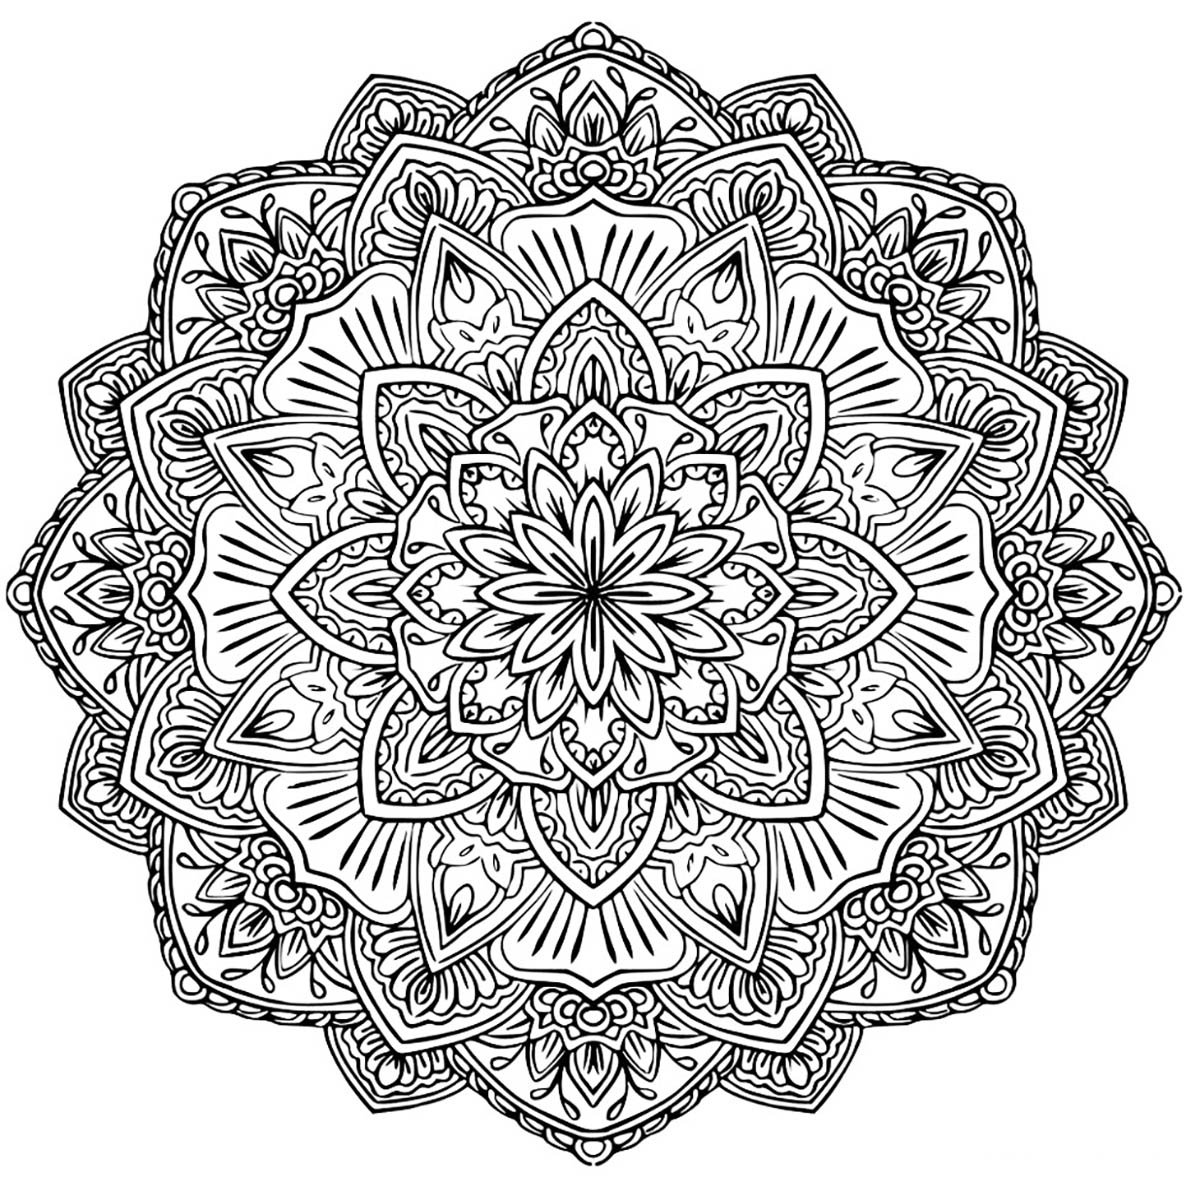 Mandala to download in pdf 1 - M&alas Adult Coloring Pages